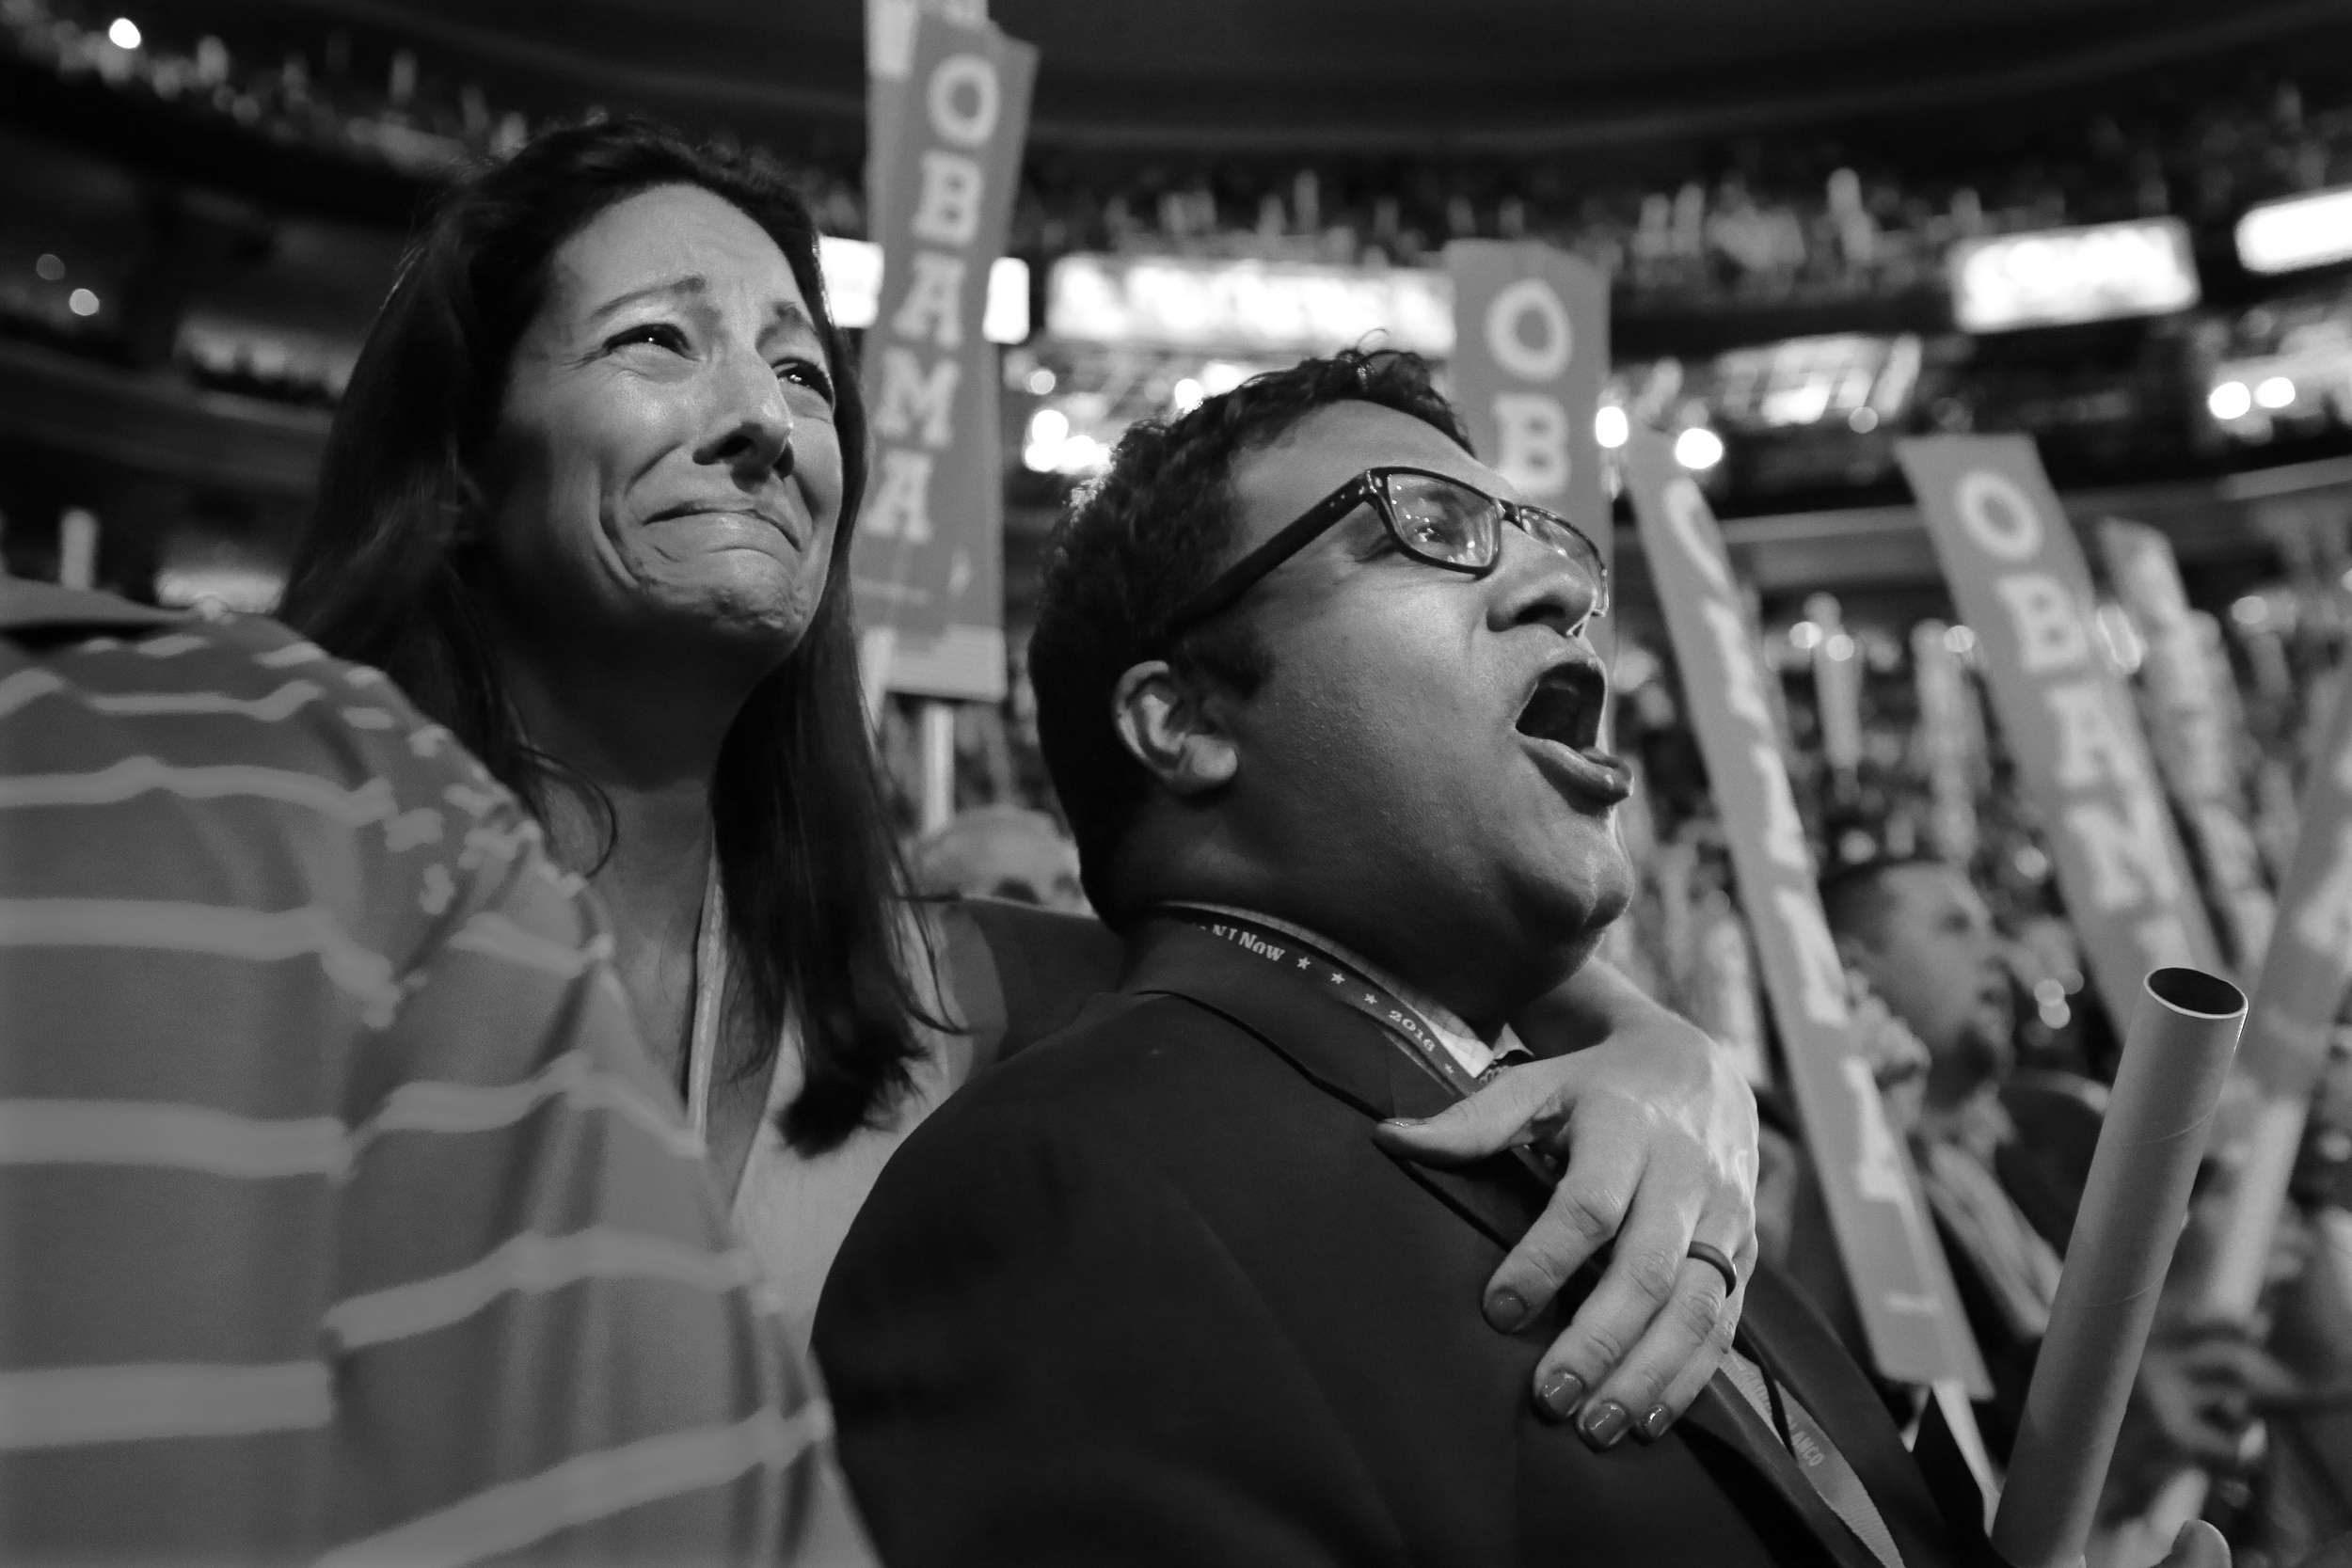  Delegates at the 2016 Democratic National Convention in Philadelphia cheer as President Barack Obama walks onto stage. 